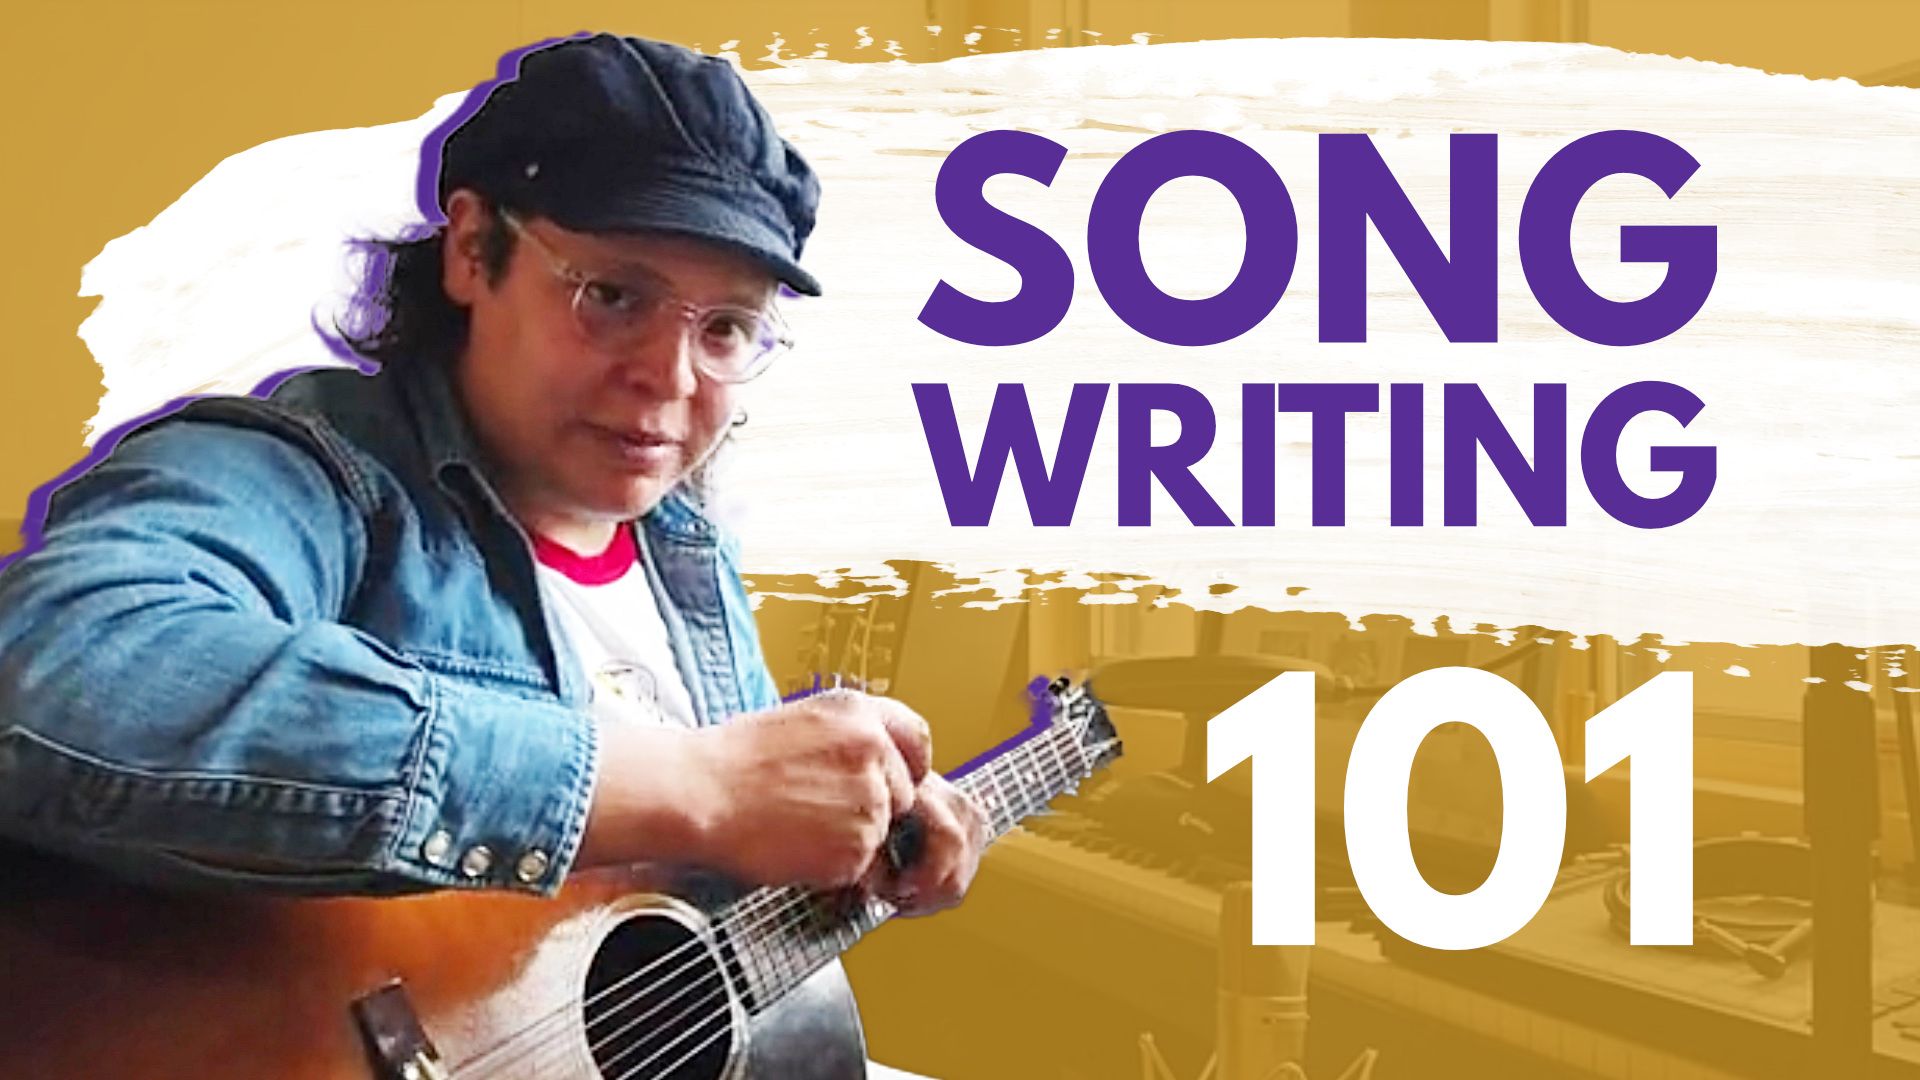 Songwriting 101